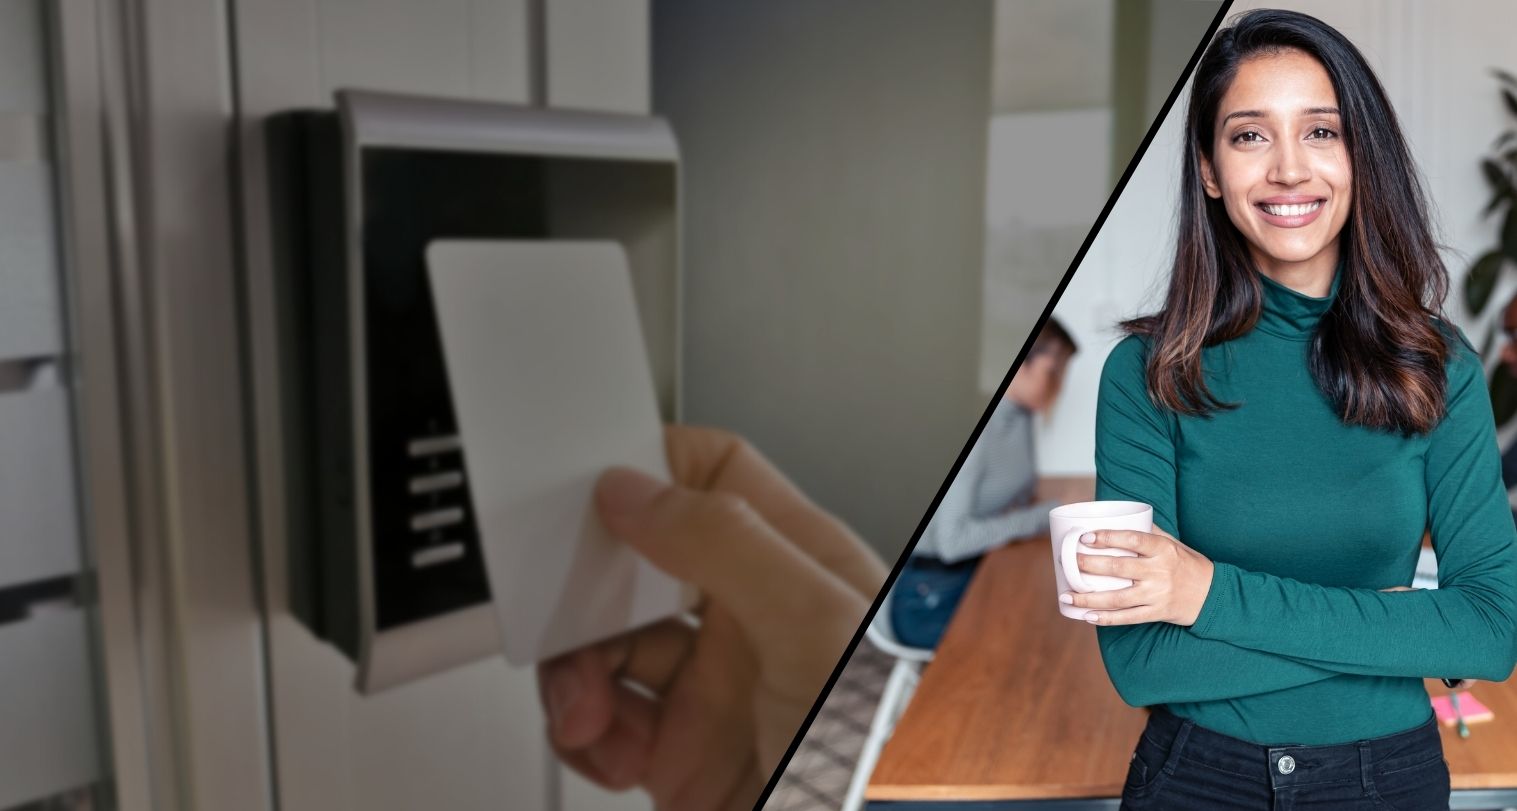 Access Control Systems and Security for Business - Spotter Security